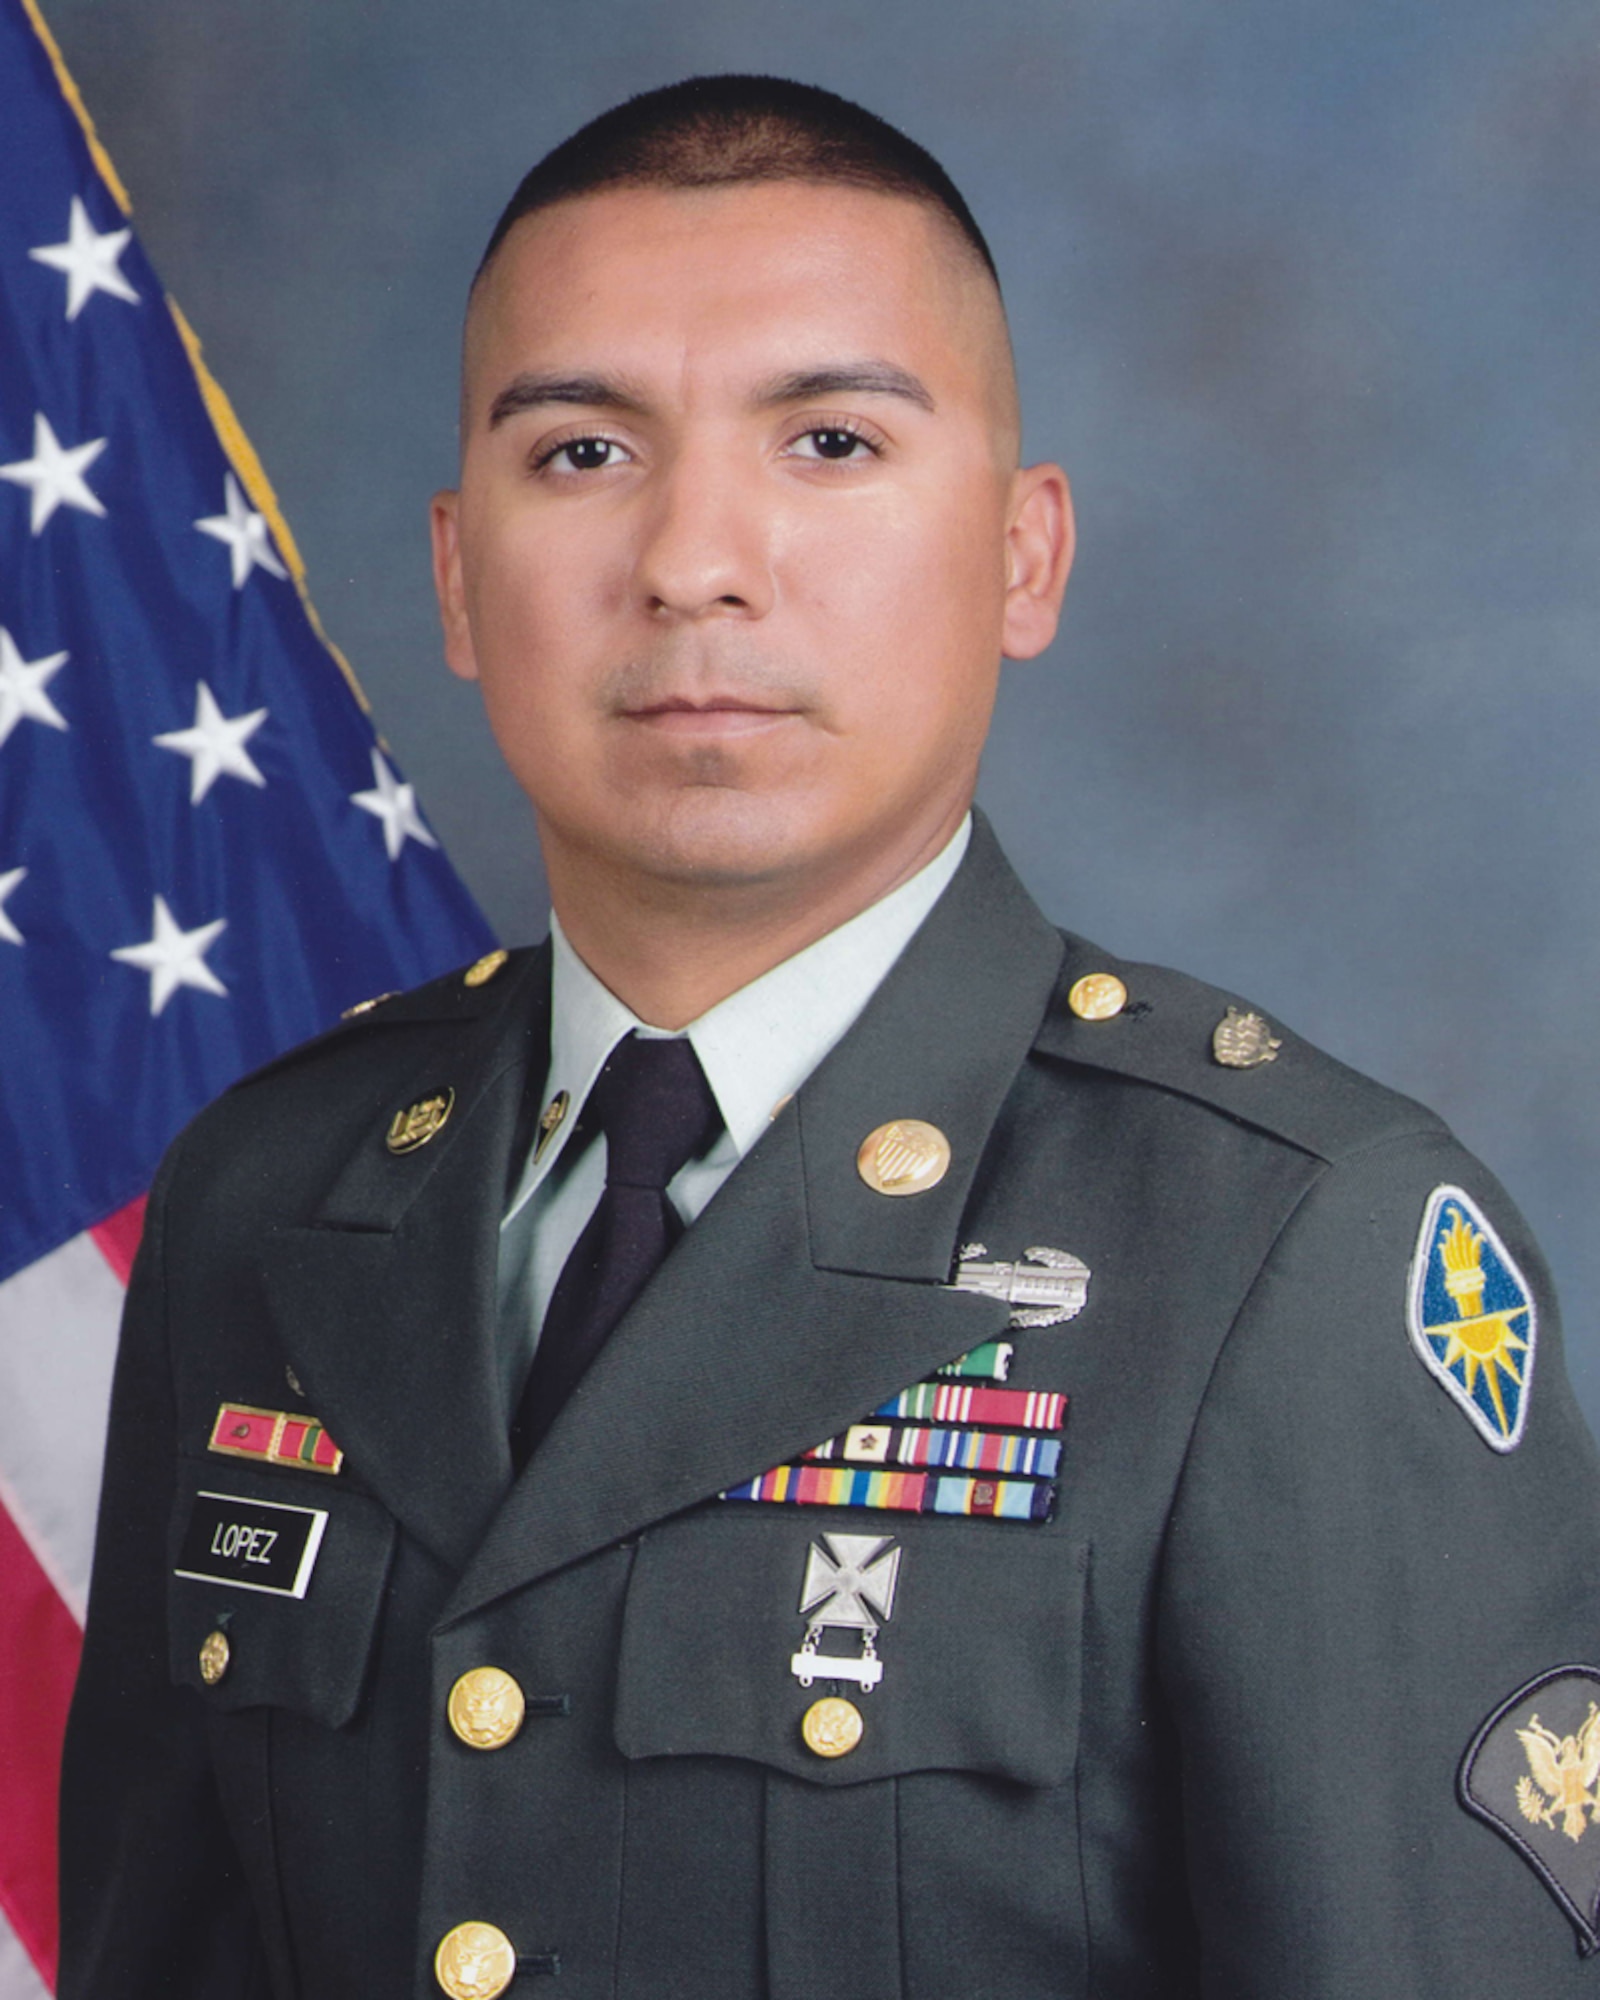 Cpl. Dennis Lopez, 344 Military Intelligence Battalion is the 2009 Army Soldier of the Year for the 17th Training Wing, Goodfellow Air Force Base, Texas. The annual awards program recognizes both civilians and members in 16 categories of the Air Force, Army, Navy and Marines who are assigned to the wing, for their significant contributions to the 17 TRW, the community and mission. (U.S. Air Force photo/ Lou Czarnecki)